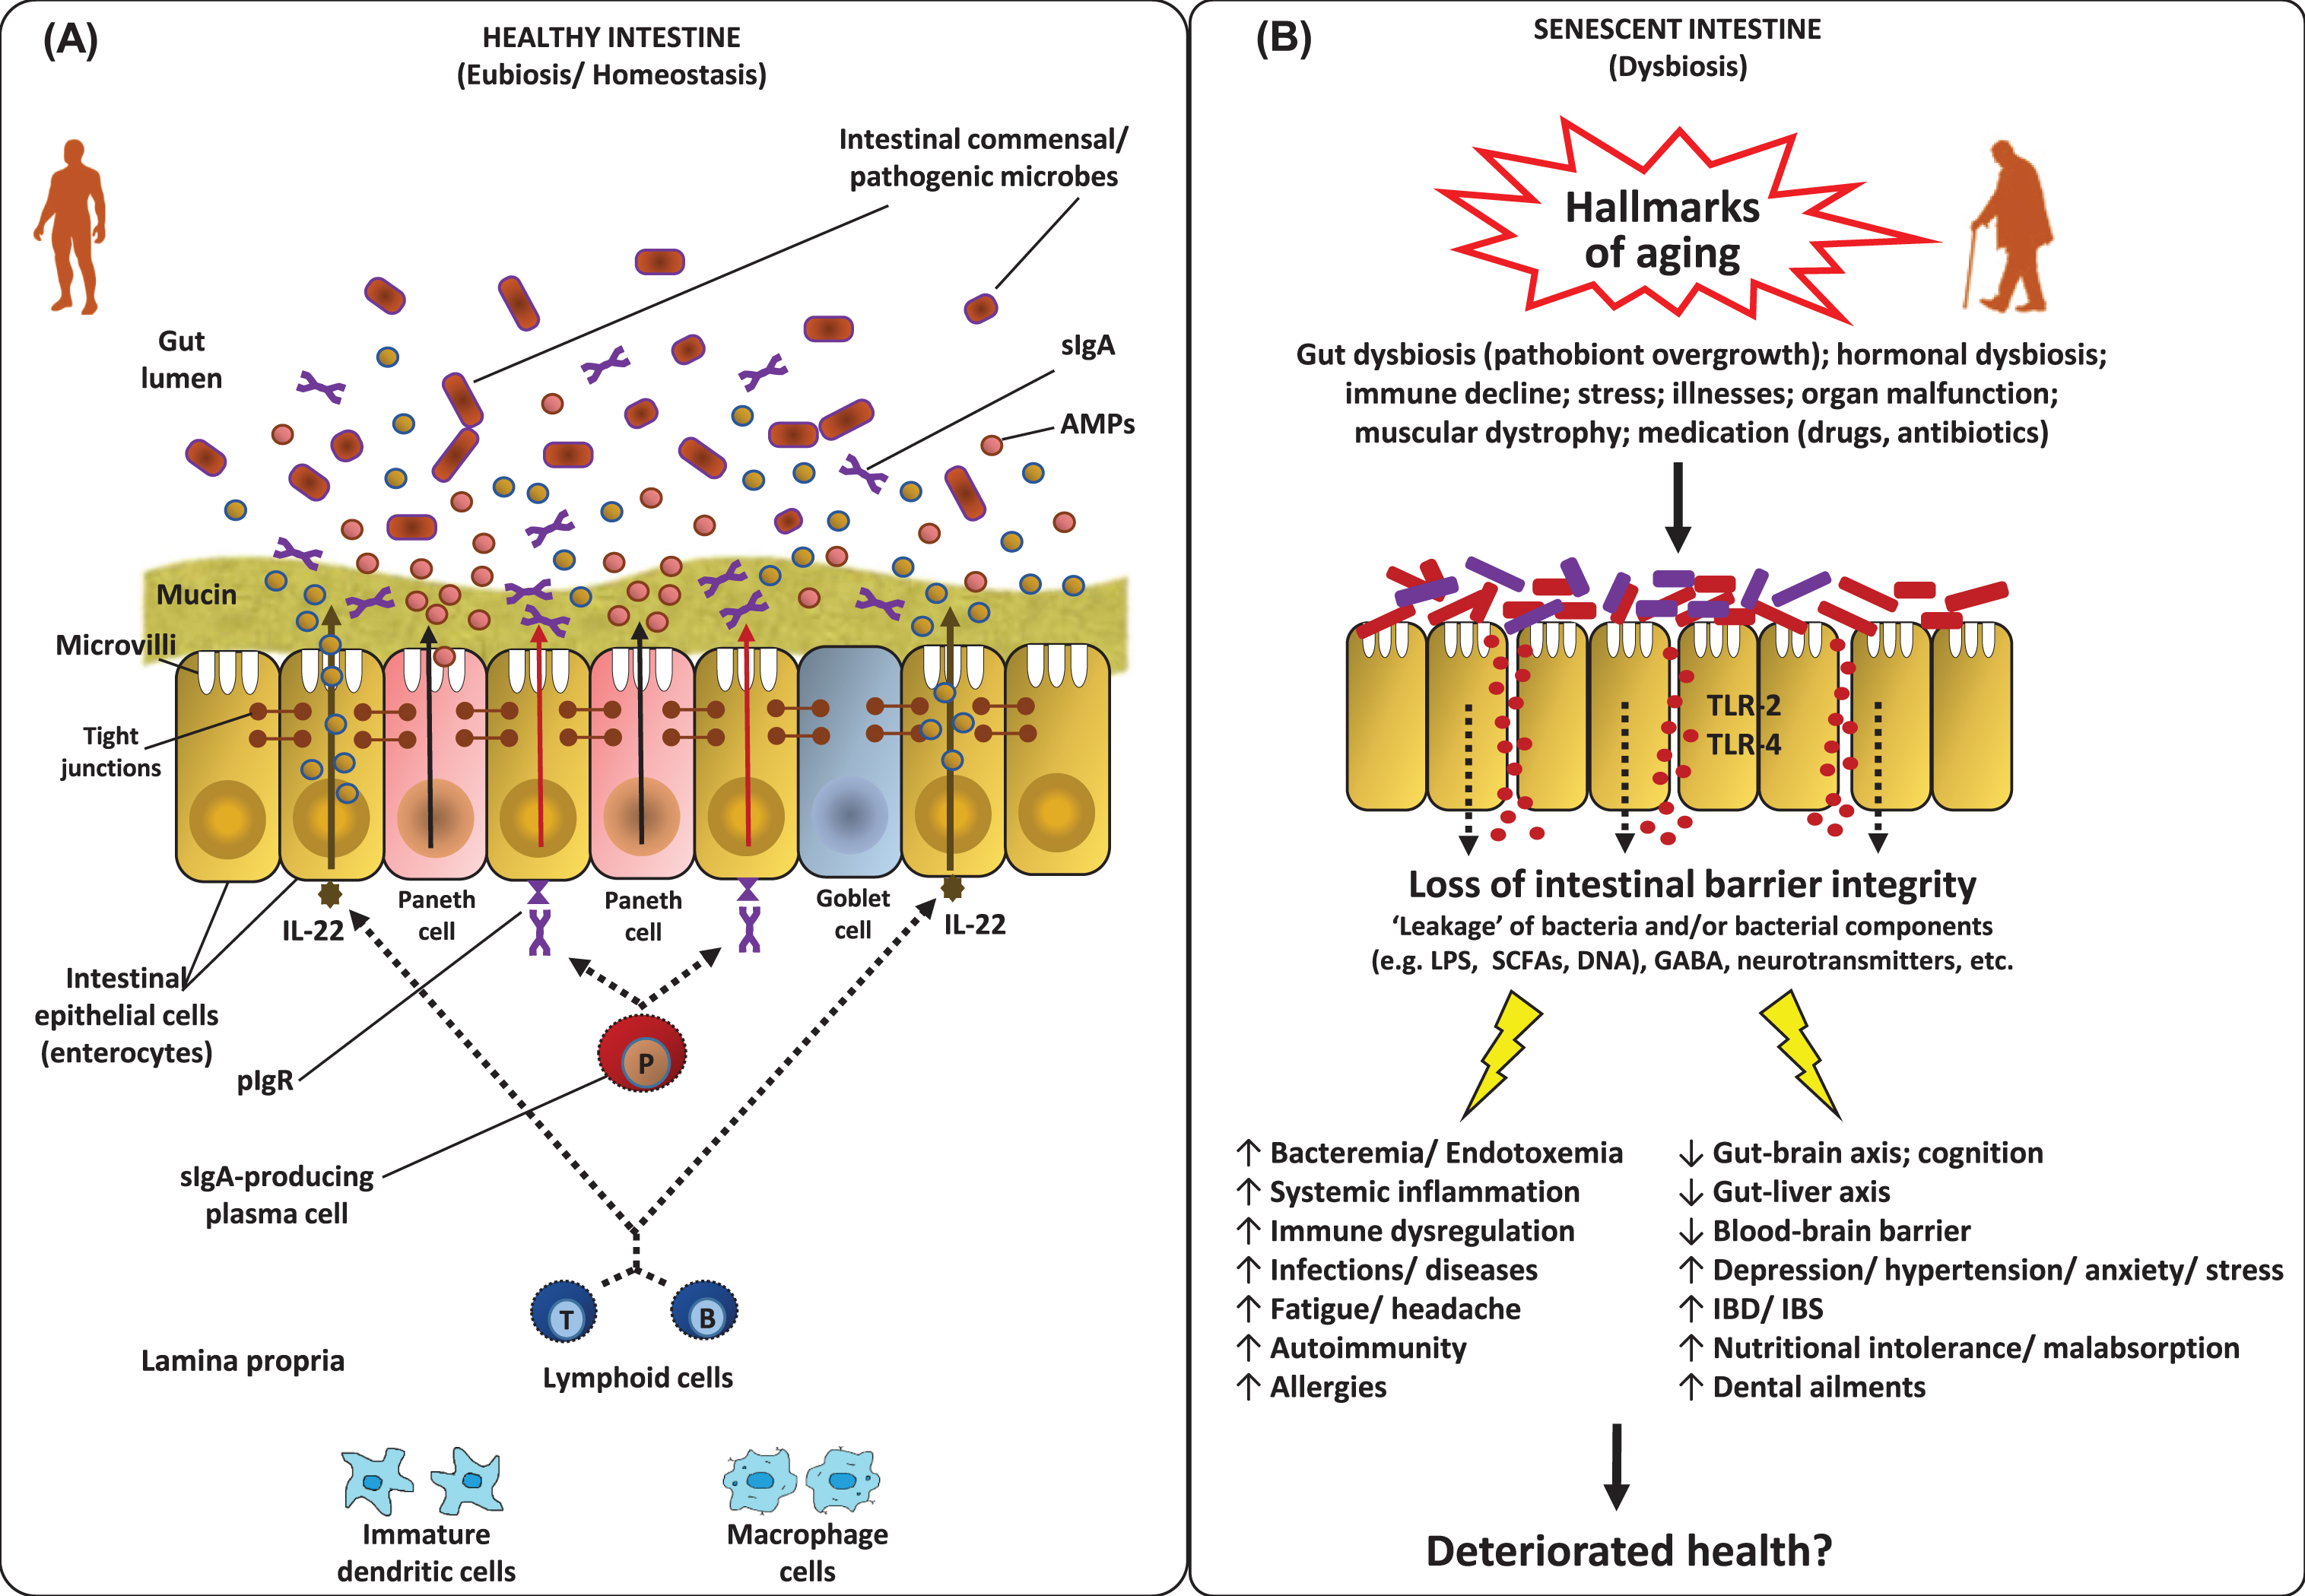 Features of the homeostatic intestinal environment (eubiosis) (A), and how a perturbed microbiota (dysbiosis) and gut barrier may instigate aging-related maladies (B). Under homeostatic conditions (eubiosis), the epithelial cells produce antimicrobial peptides (AMPs) in response to interleukins (e.g. IL-22) and also express pattern recognition receptors (e.g. Toll-like receptors; TLR). The gut microbes regulate mucous secretion and AMPs production and also regulate/enhance the gut barrier integrity via producing short-chain fatty acids (SCFAs). Goblet cells produce mucus to constrain pathobiont invasion. Lymphoid cells (e.g. TH17 cells) play a role in host defense by producing controlled arrays of IL-22. Dendritic cells (DCs) induce the activation and differentiation of naive B cells to produce plasma cells that produce commensal-specific IgA in the lamina propria. IgA is transported into the gut lumen as secreted IgA (sIgA) via (polymeric immunoglobulin receptor pIgR) receptors, where after sIgA binds to commensal microbes and soluble antigens, thereby restraining their adherence to the host epithelium and leakage through the gut barrier. However, under dysbiosis and/or senescent milieus, the altered microbiota composition and weakened/perturbed gut permeability may lead to increased adherence and leakage of various microbes and microbial by-products through the gut barrier thereby instigating hyper-inflammatory responses eventually increasing the host susceptibility to various gut-related as well as systemic ailments via perturbations in the magnitude of gut-brain axis, gut-liver axis etc. [7, 36, 63, 84, 124, 127, 128, 132, 133, 147].